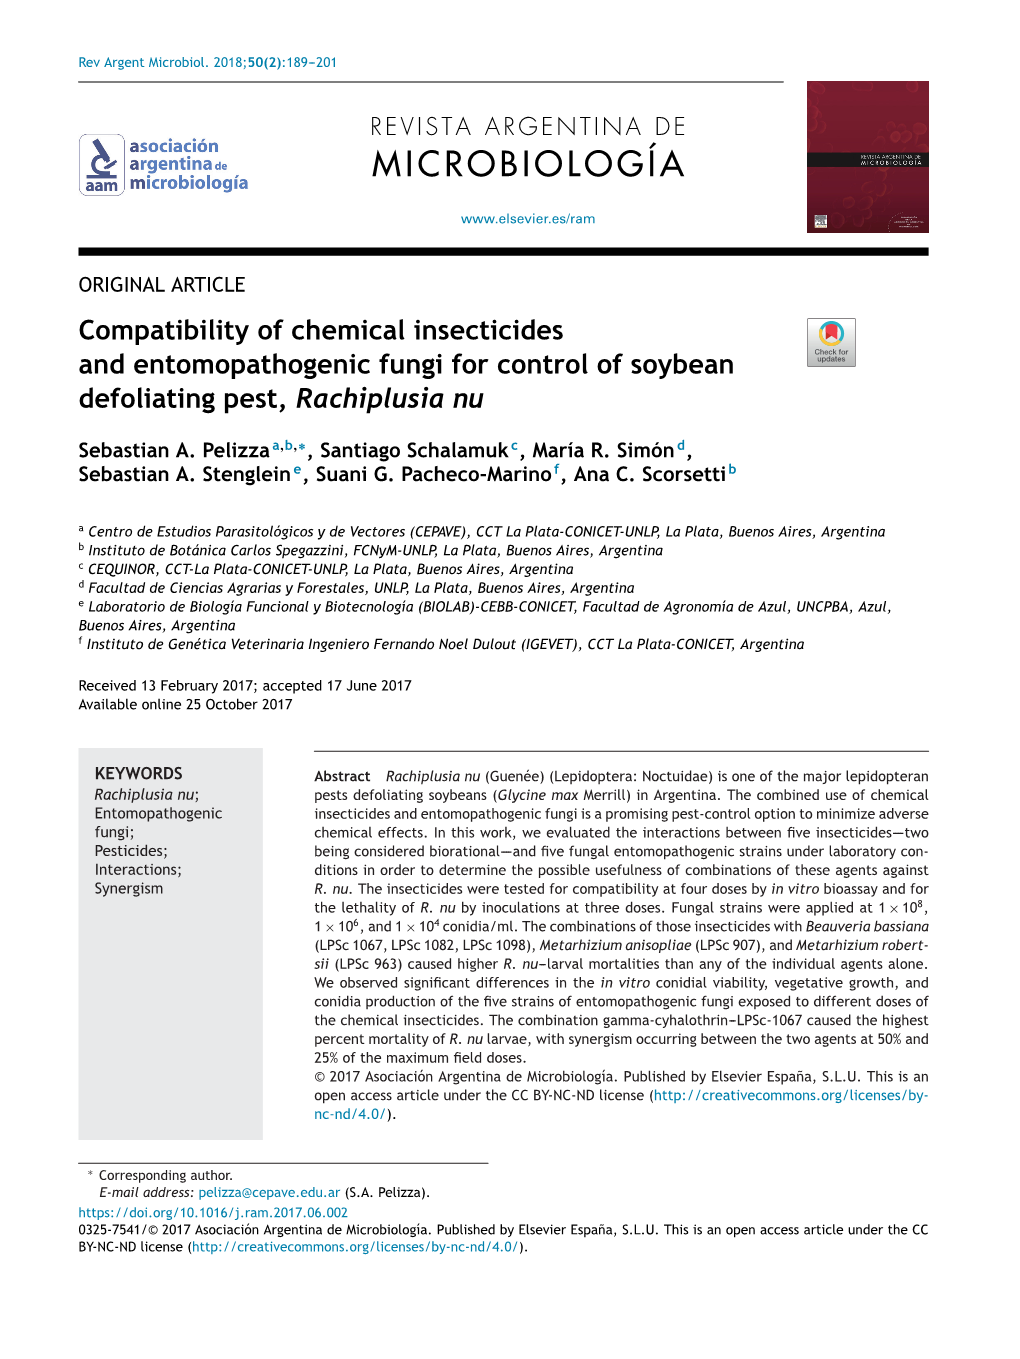 Compatibility of Chemical Insecticides and Entomopathogenic Fungi For